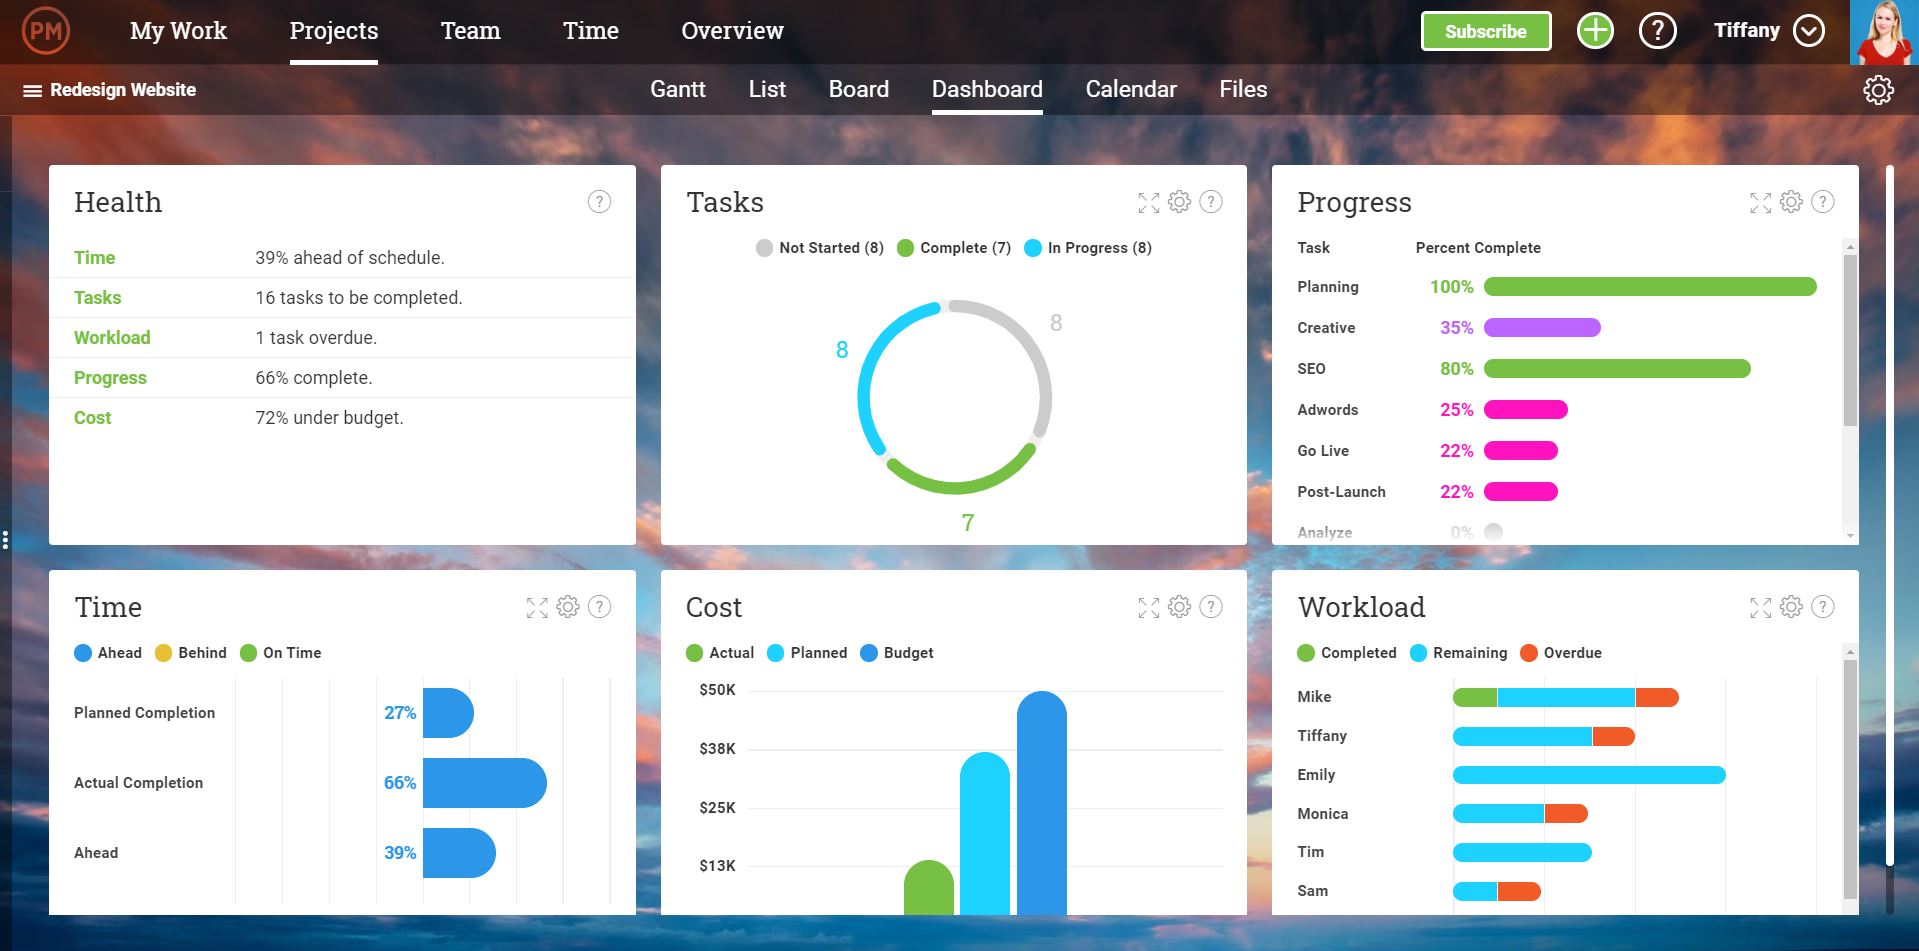 ProjectManager.com has robust reporting features like real-time dashboards